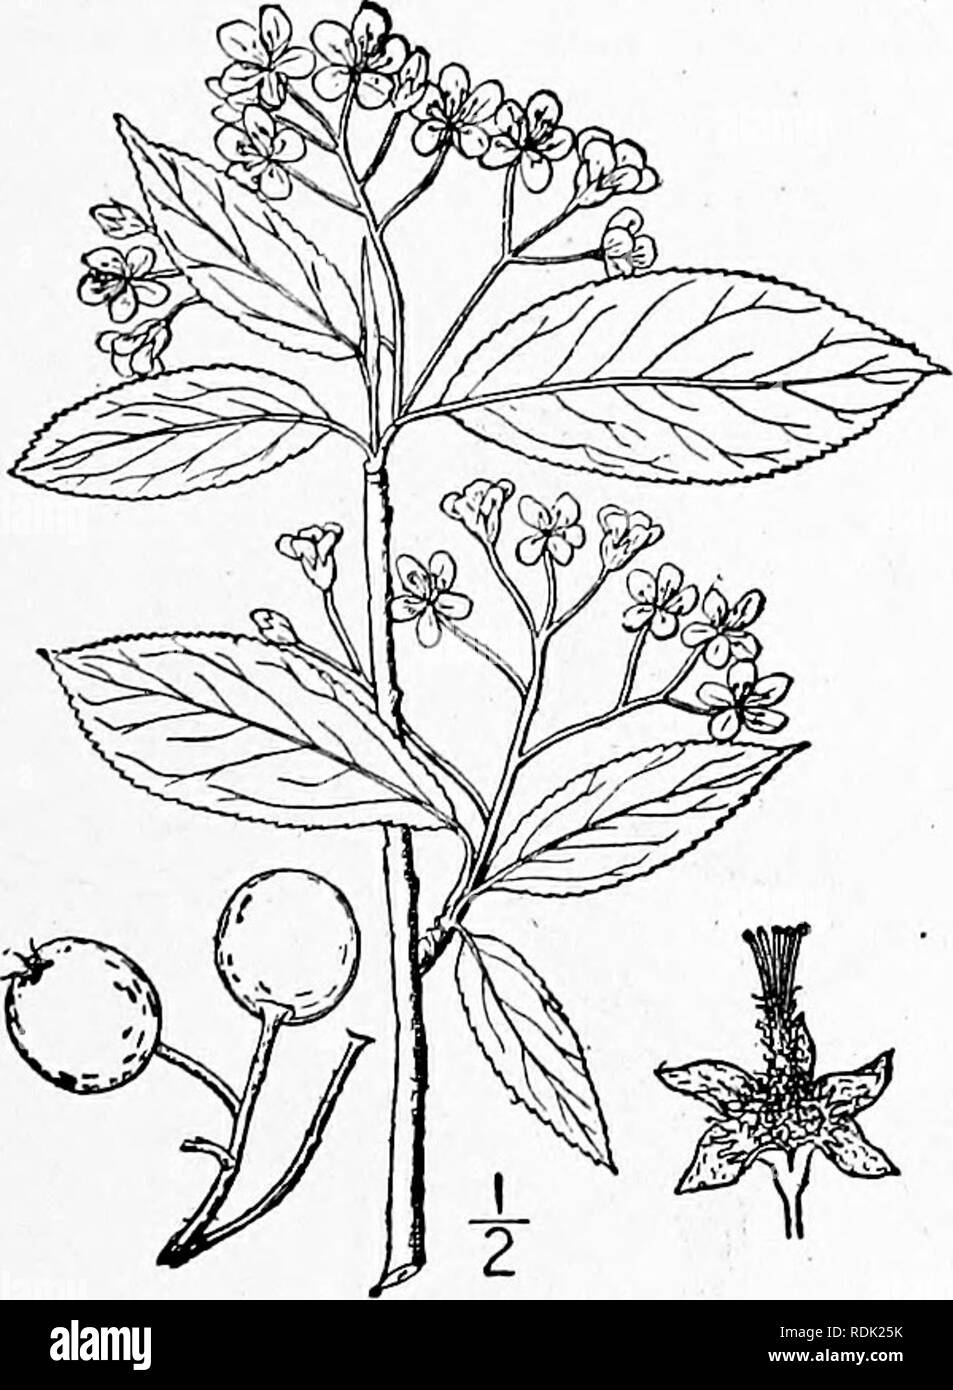 . An illustrated flora of the northern United States, Canada and the British possessions, from Newfoundland to the parallel of the southern boundary of Virginia, and from the Atlantic Ocean westward to the 102d meridian. Botany; Botany. 3. Aronia melanocarpa (Michx.) Britton. Black Chokeberr)'. Chokepear. Fig. 2328. Sp. PI. 2: 1013. Michx. Fl. Bor. Leaves Mespilus arbutifolia van nigra Willd. I'Soo. Mespilus arbutifolia var. melanocarpa Am. I : 292. 1803. Pyrus melanocarpa Willd. Enum. 525. 1809. Pyrus nigra Sargent, Gard. &amp; For. 3: 416. 1891 Aronia nigra Britton, Mem. Torr. Club 5: 182. A Stock Photo